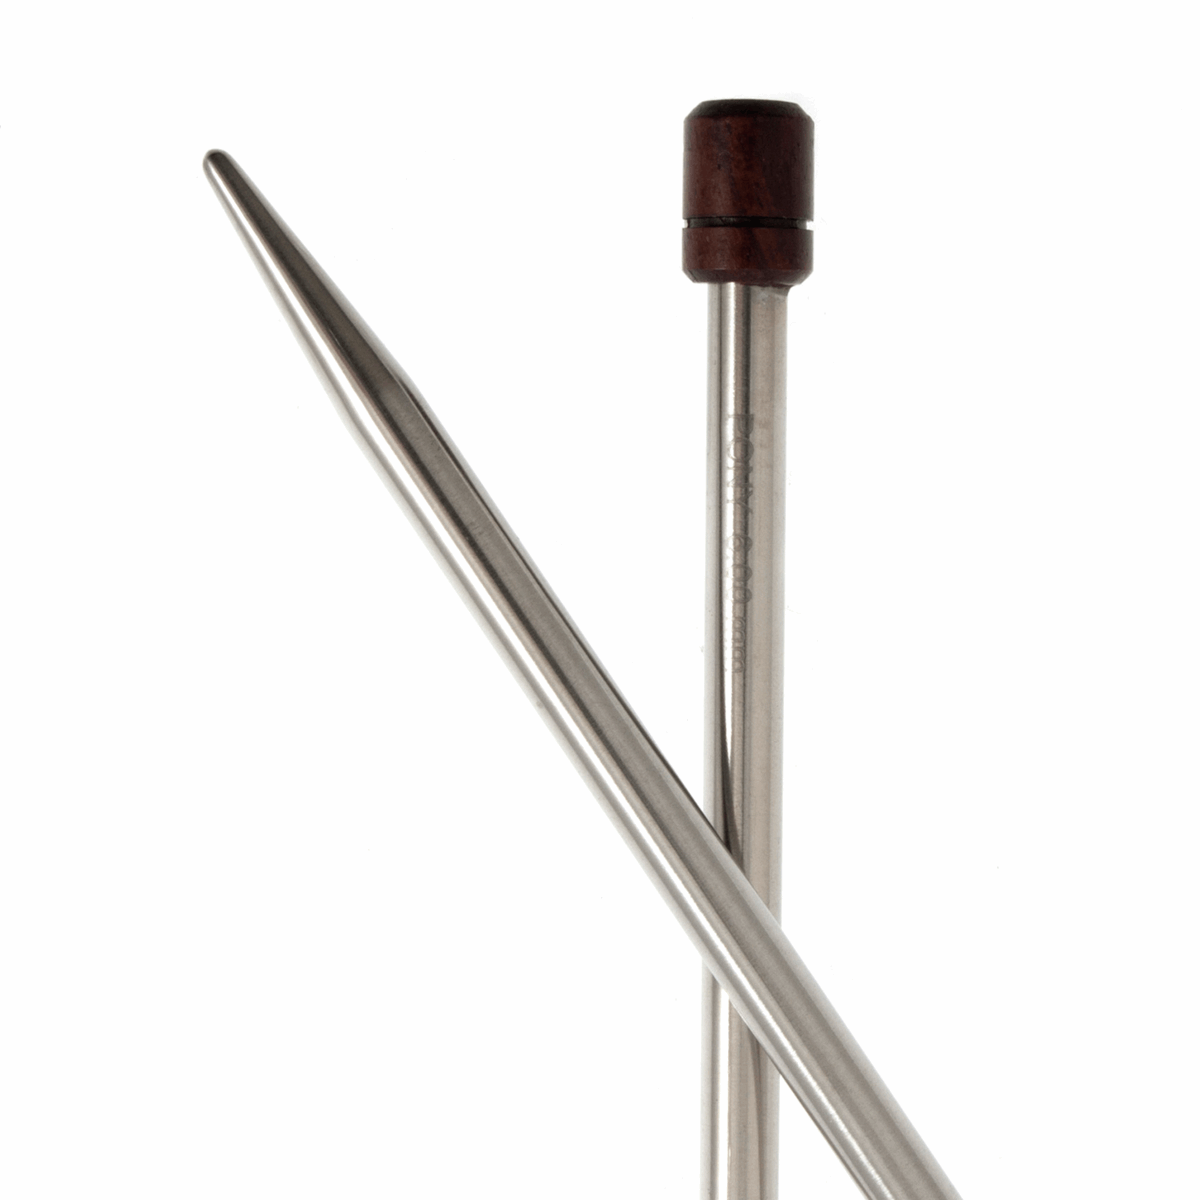 PONY 'Elan' Single-Ended Stainless Steel Knitting Pins with Rosewood Knob - 35cm x 6.00mm